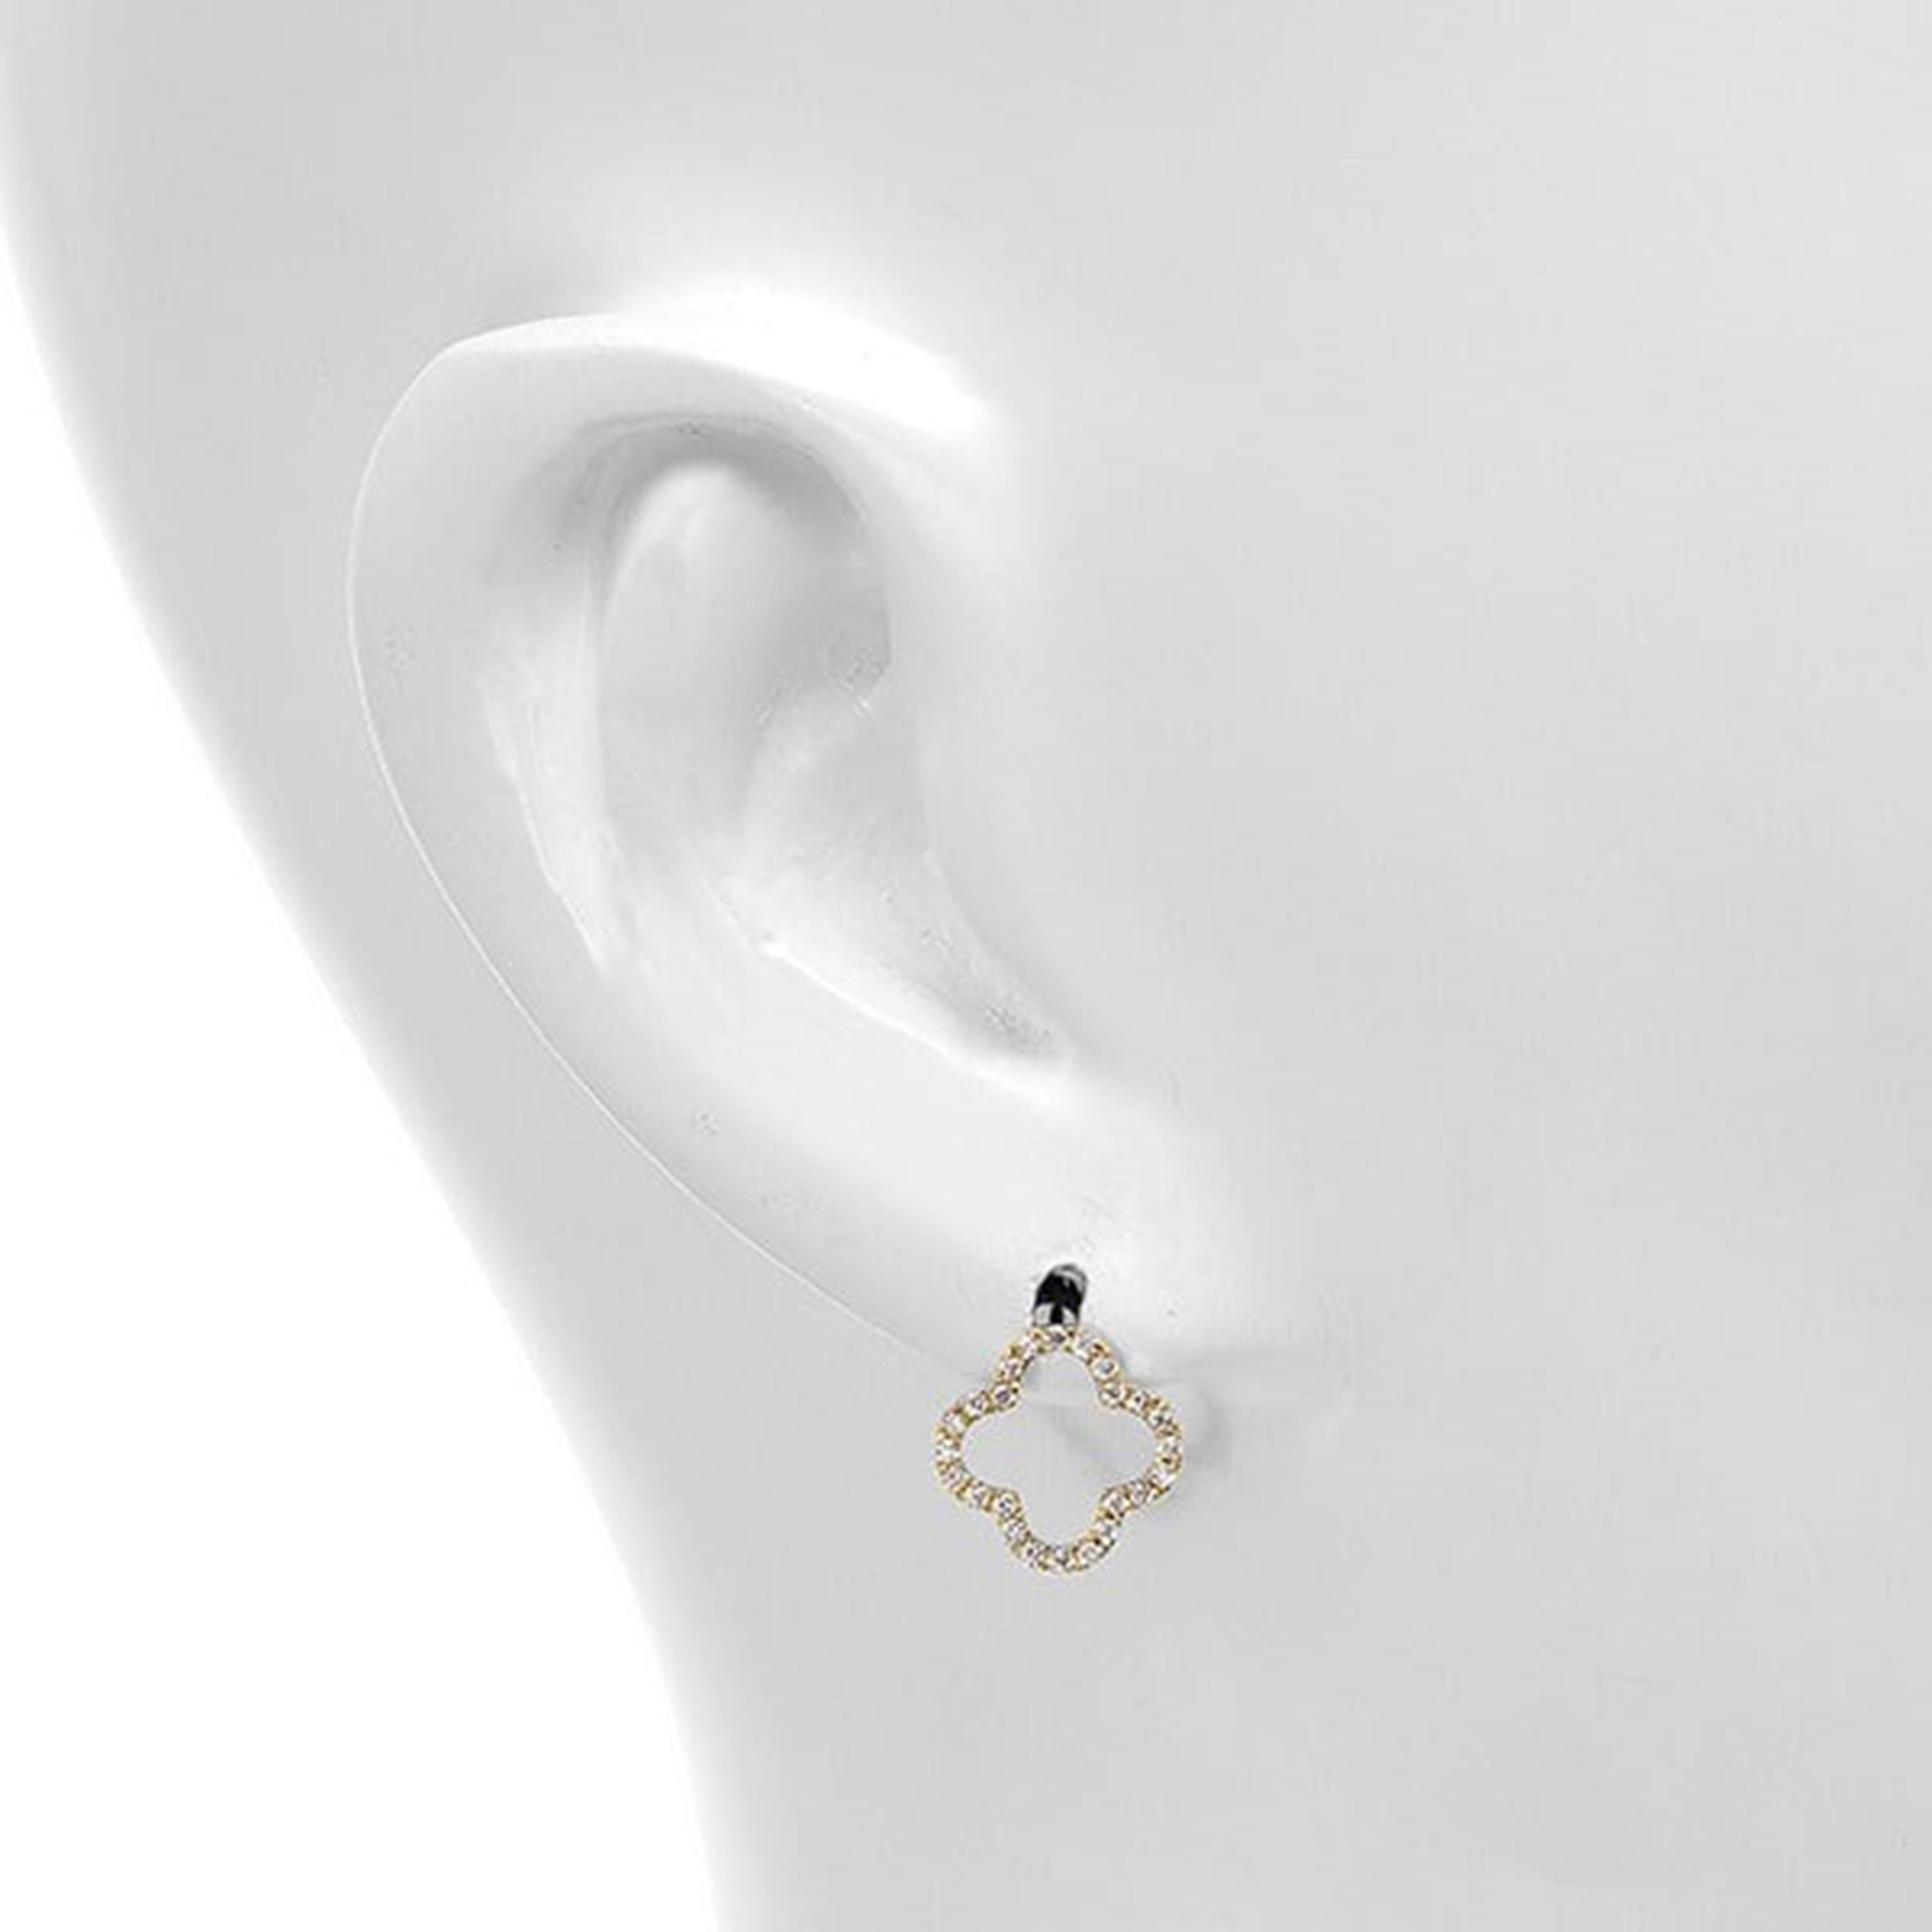 Round Cut 18K Yellow Gold Clover Shaped Diamond Earrings  0.11ct x 2  Approx. 10.5mm x 1 For Sale